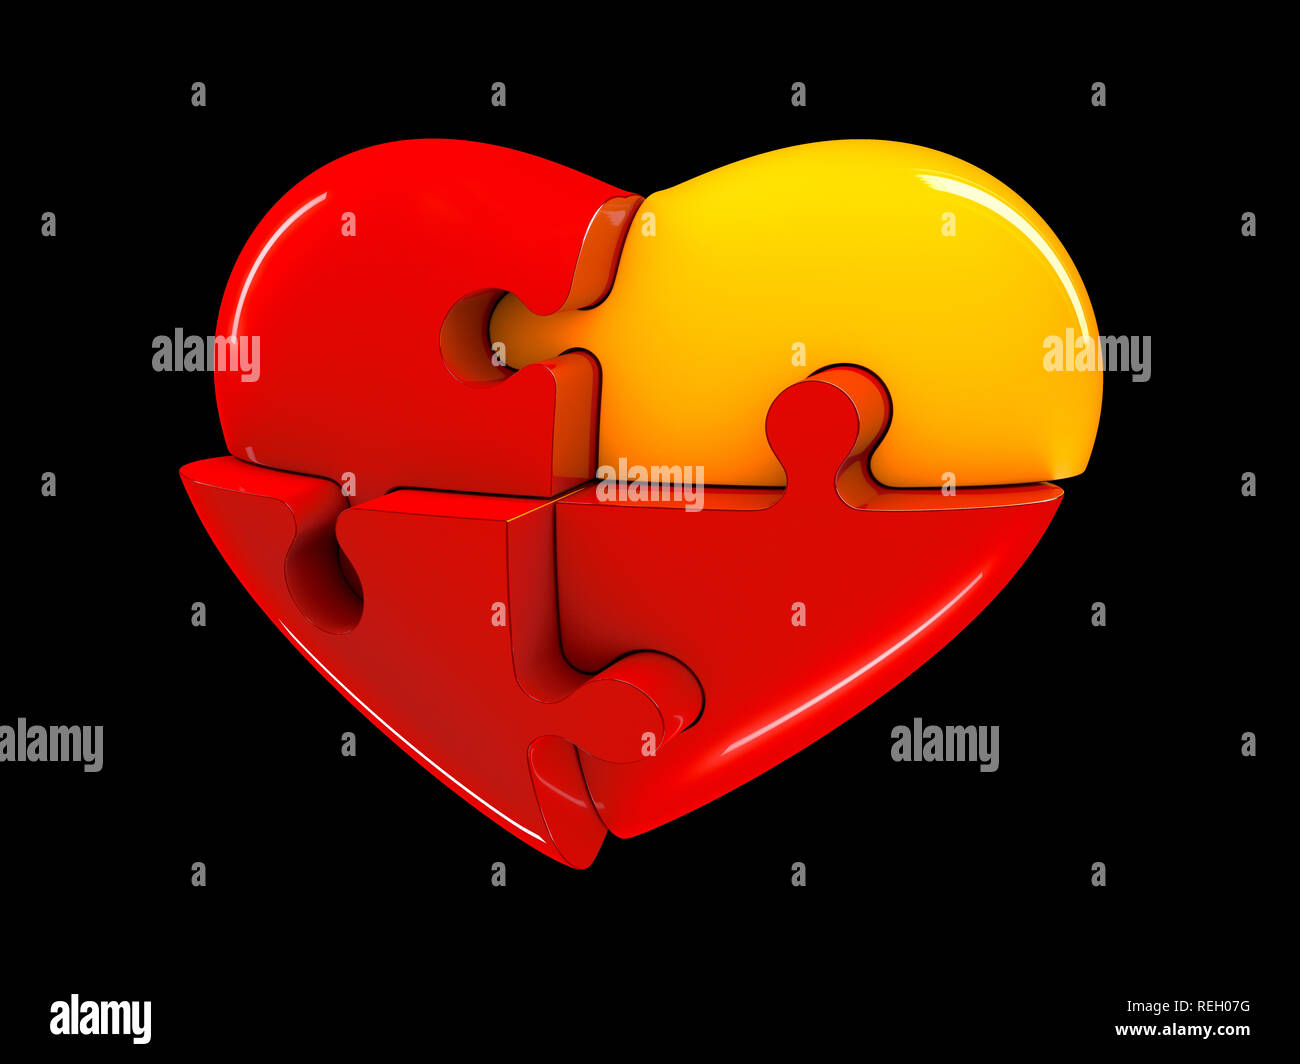 Red And Yellow Jigsaw Puzzle Heart Diagram 3d Illustration Isolated